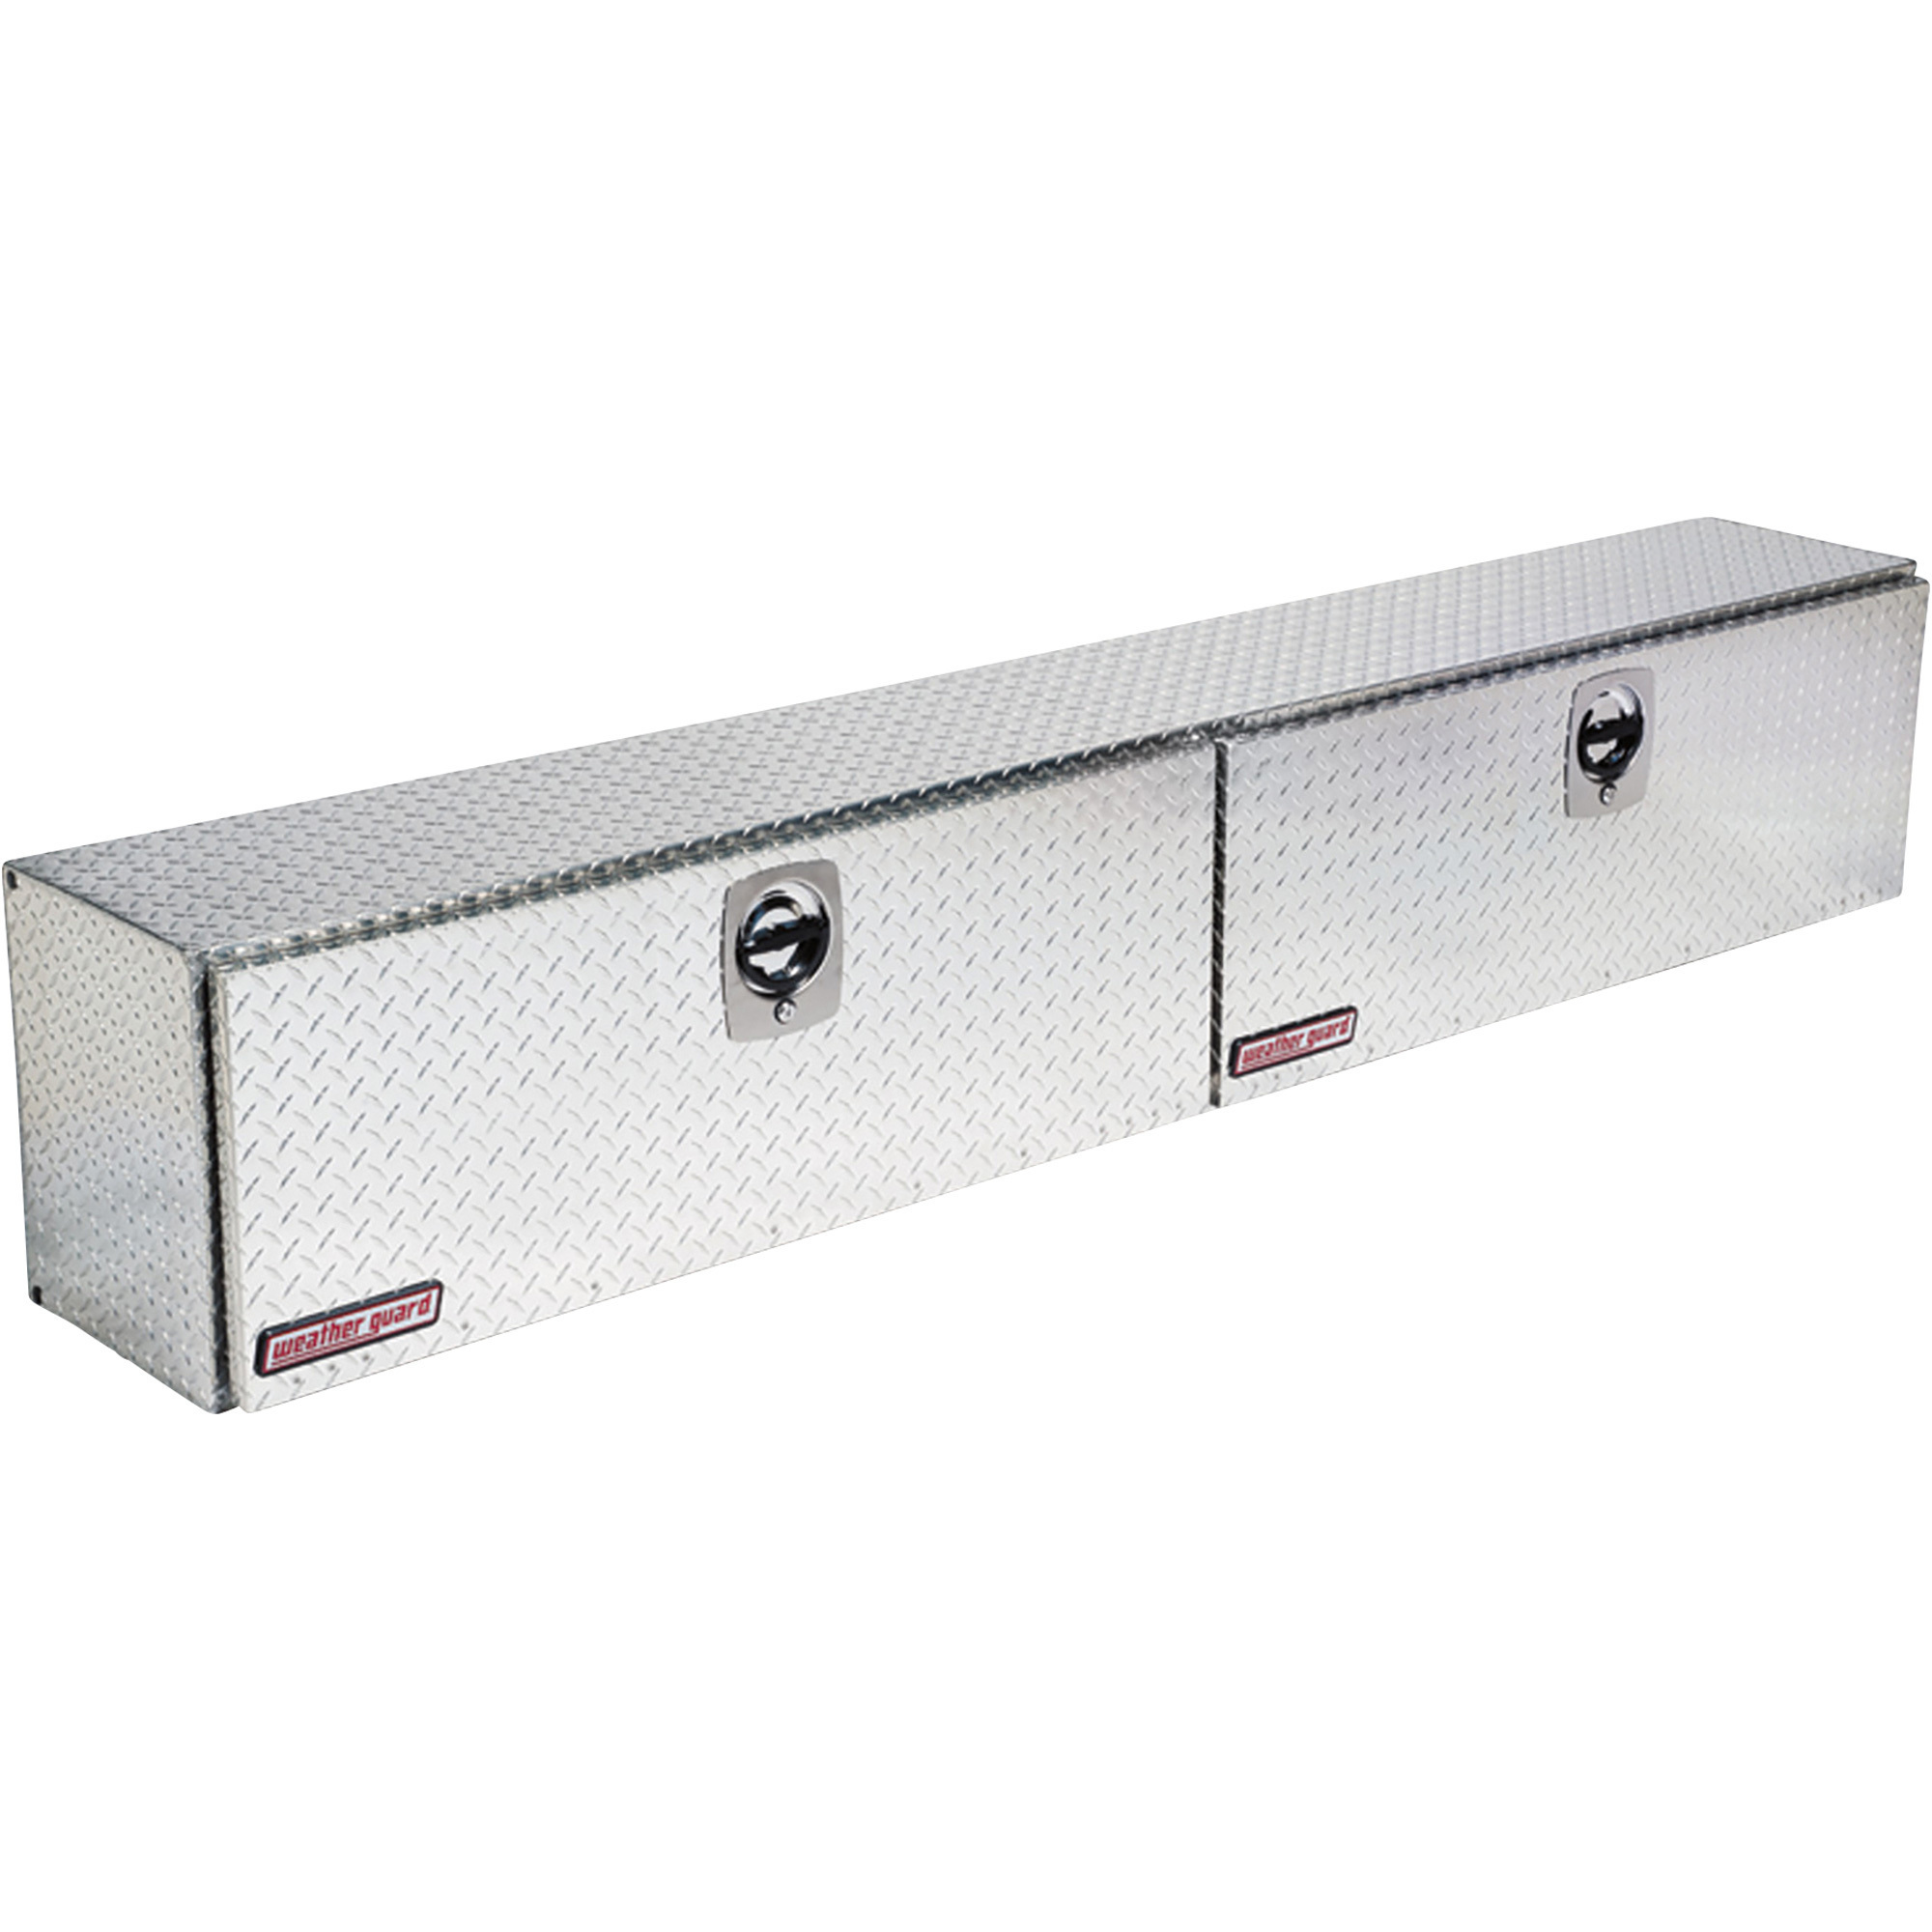 High-Side 2-Door Top-Mount Truck Tool Box — Aluminum, Diamond Plate, 3-Point Latching, 96.25Inch x 13.25Inch x 16Inch, Model - Weather Guard 396-0-02